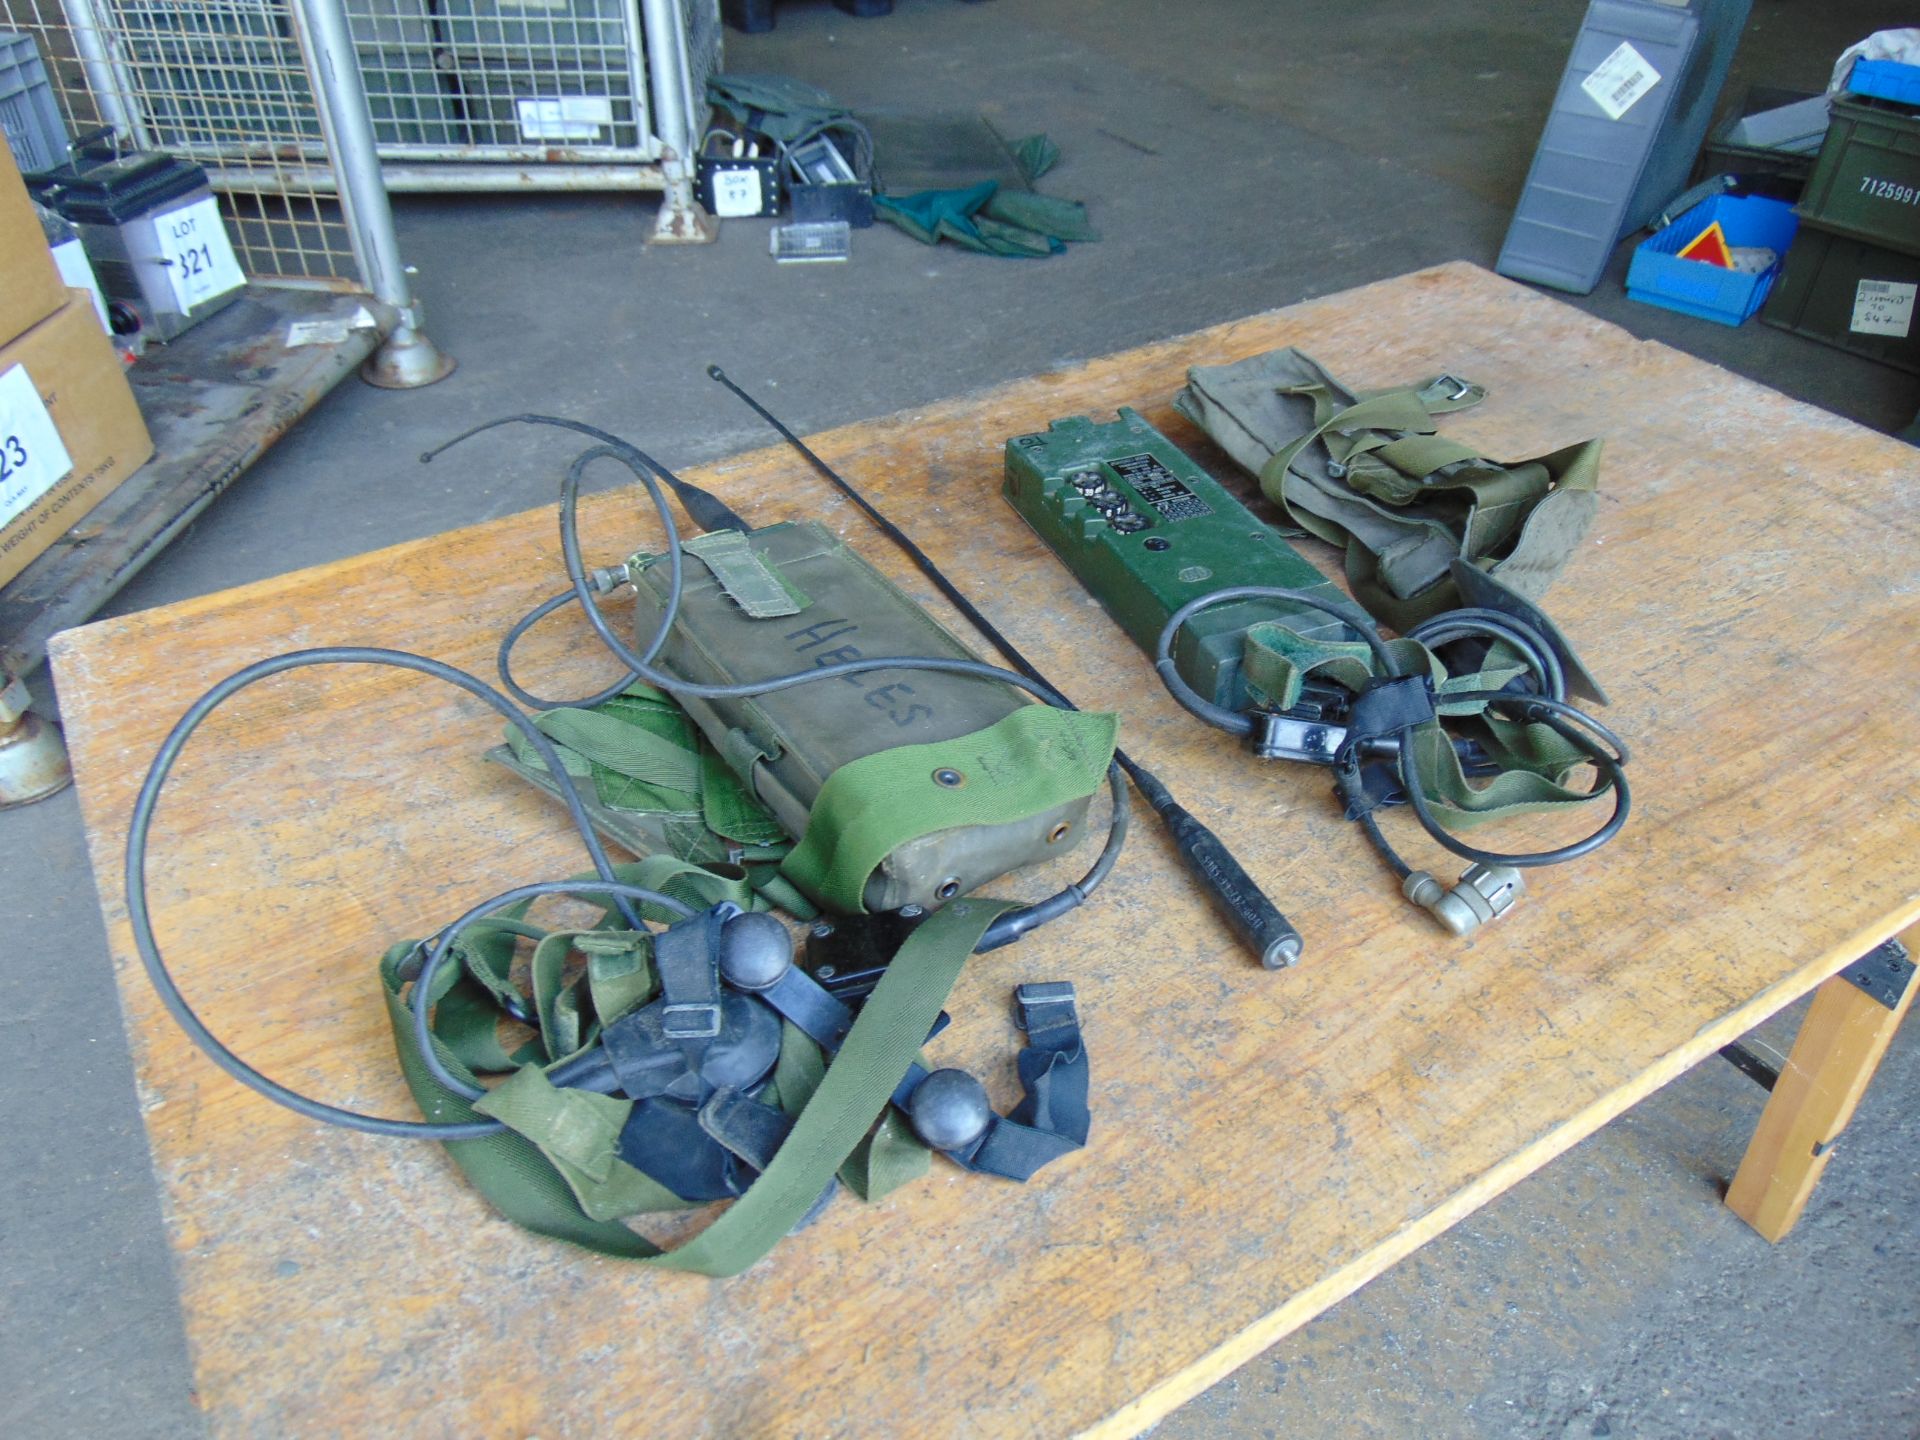 2 x RT 349 British Army Transmitter / Receiver c/w Pouch, Headset, Antenna and Battery Cassette - Image 3 of 5